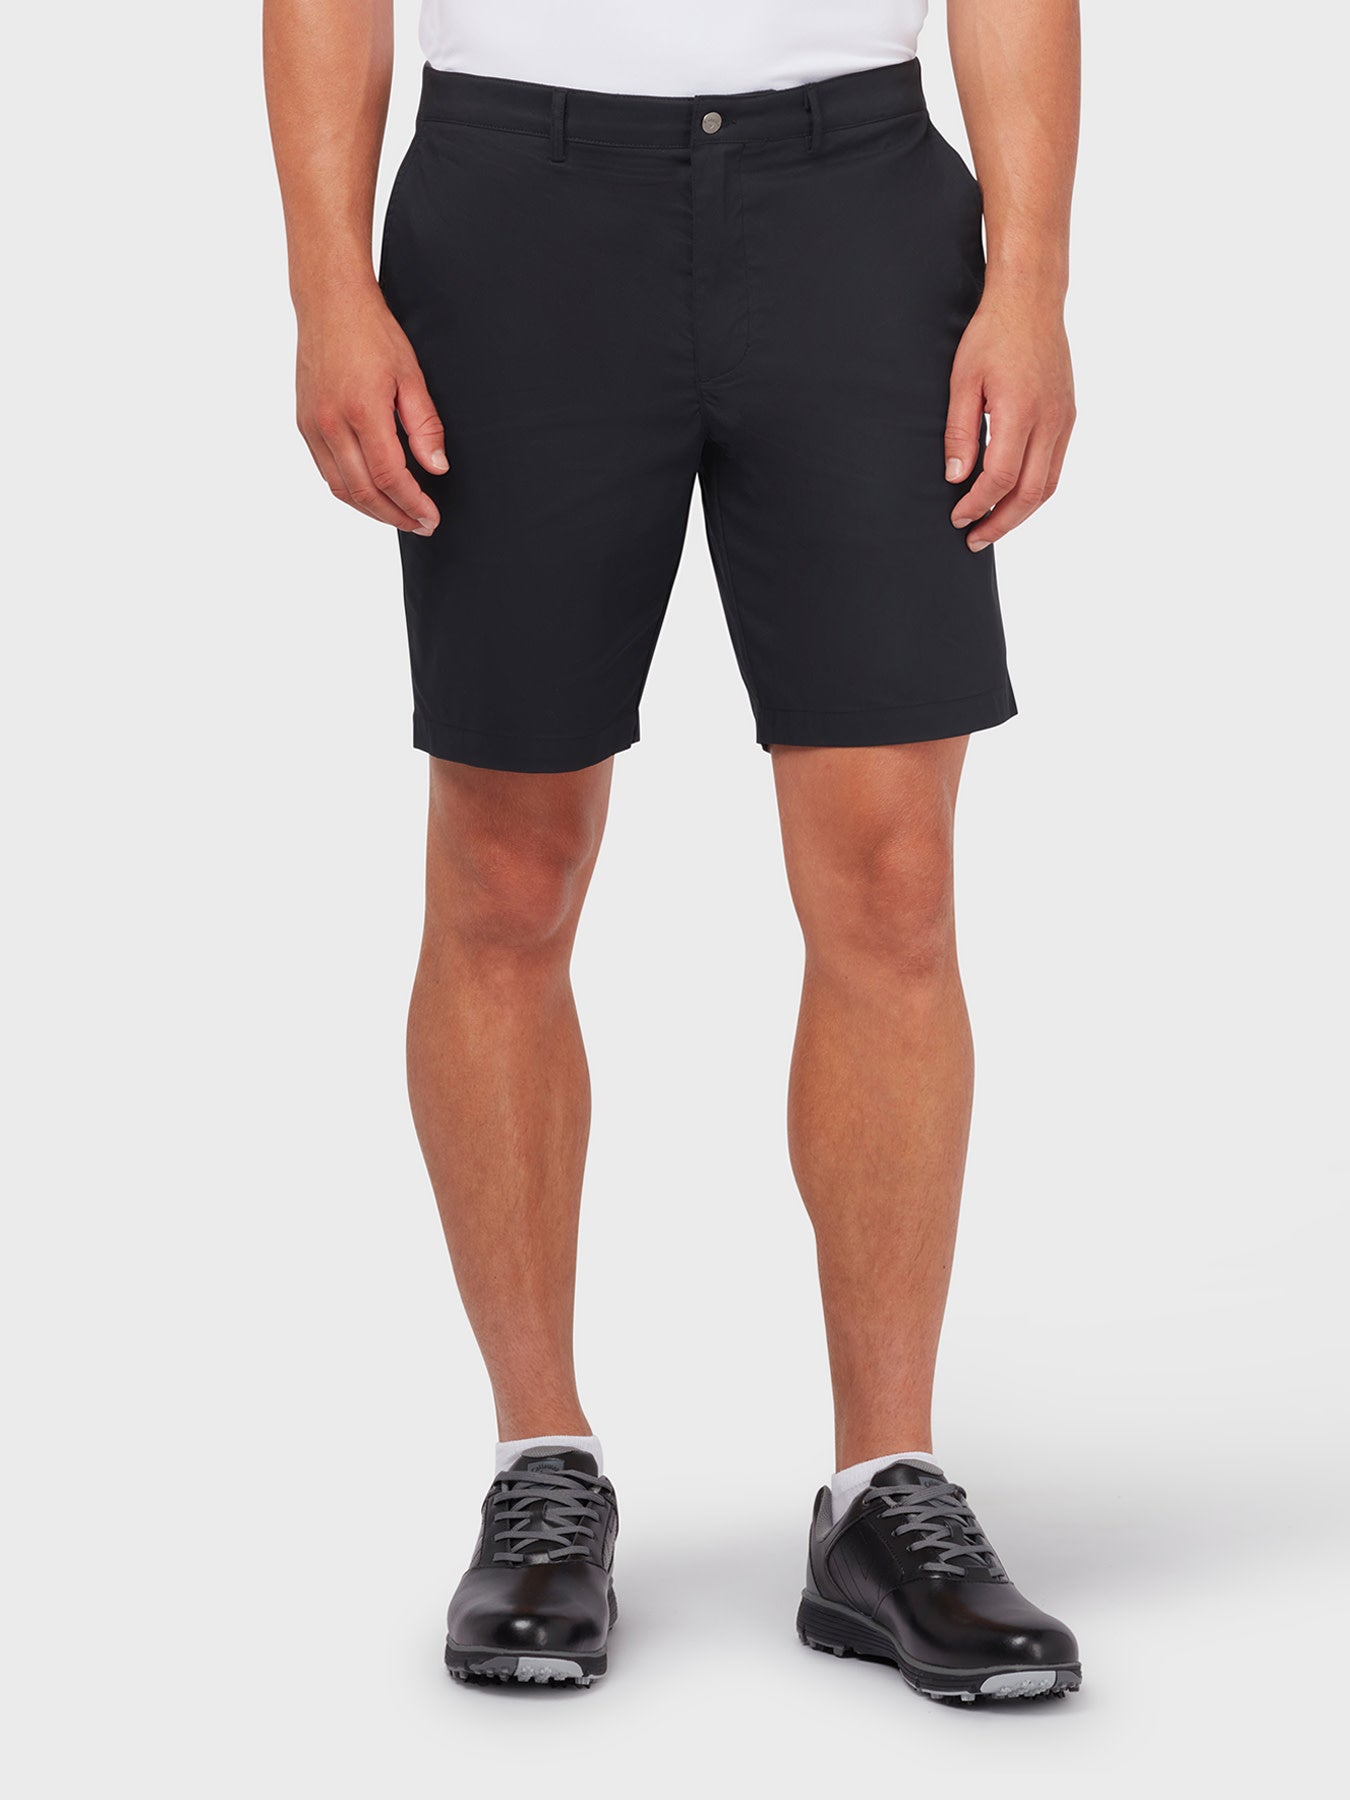 View X Series Flat Fronted Short In Caviar Caviar 33 information